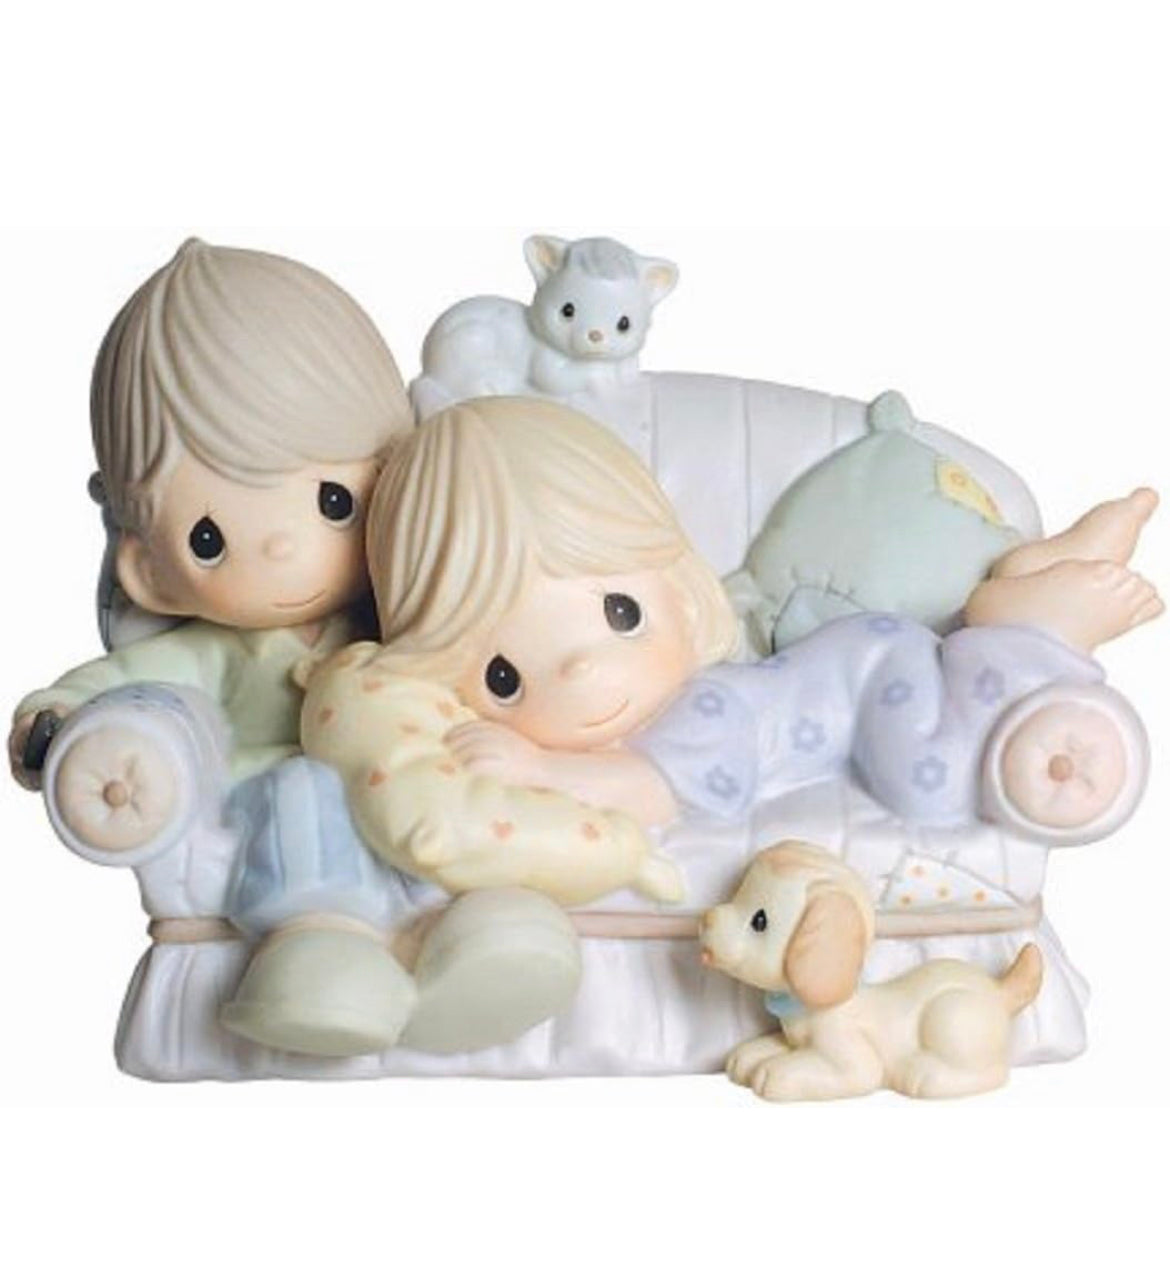 Together Is The Nicest Place To Be - Precious Moments Figurine 4003175